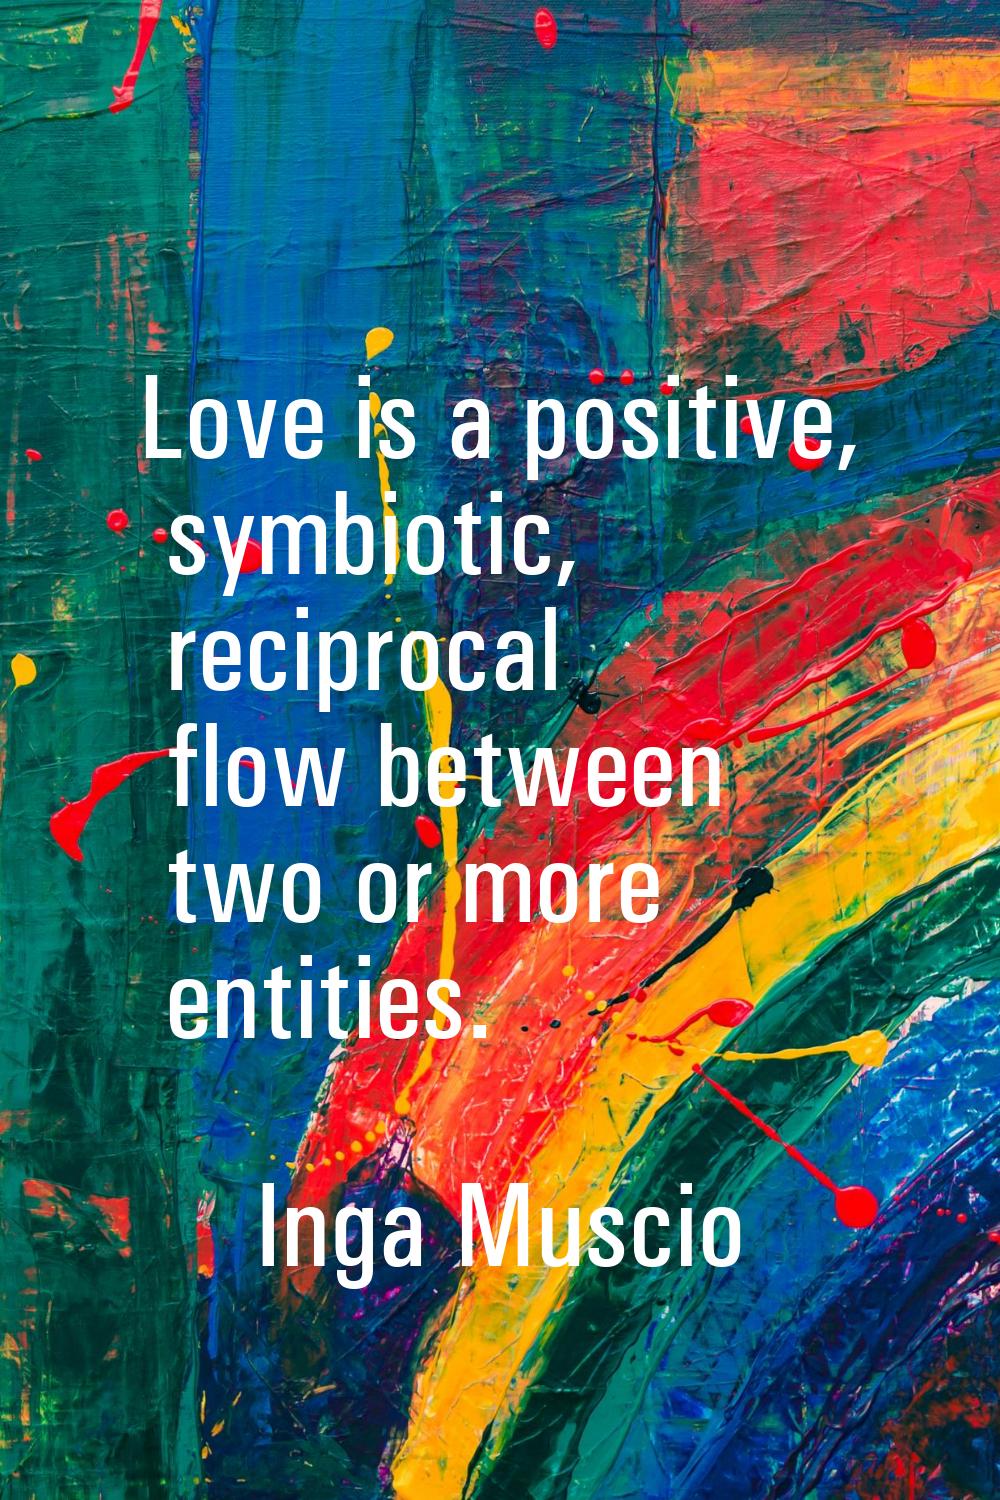 Love is a positive, symbiotic, reciprocal flow between two or more entities.